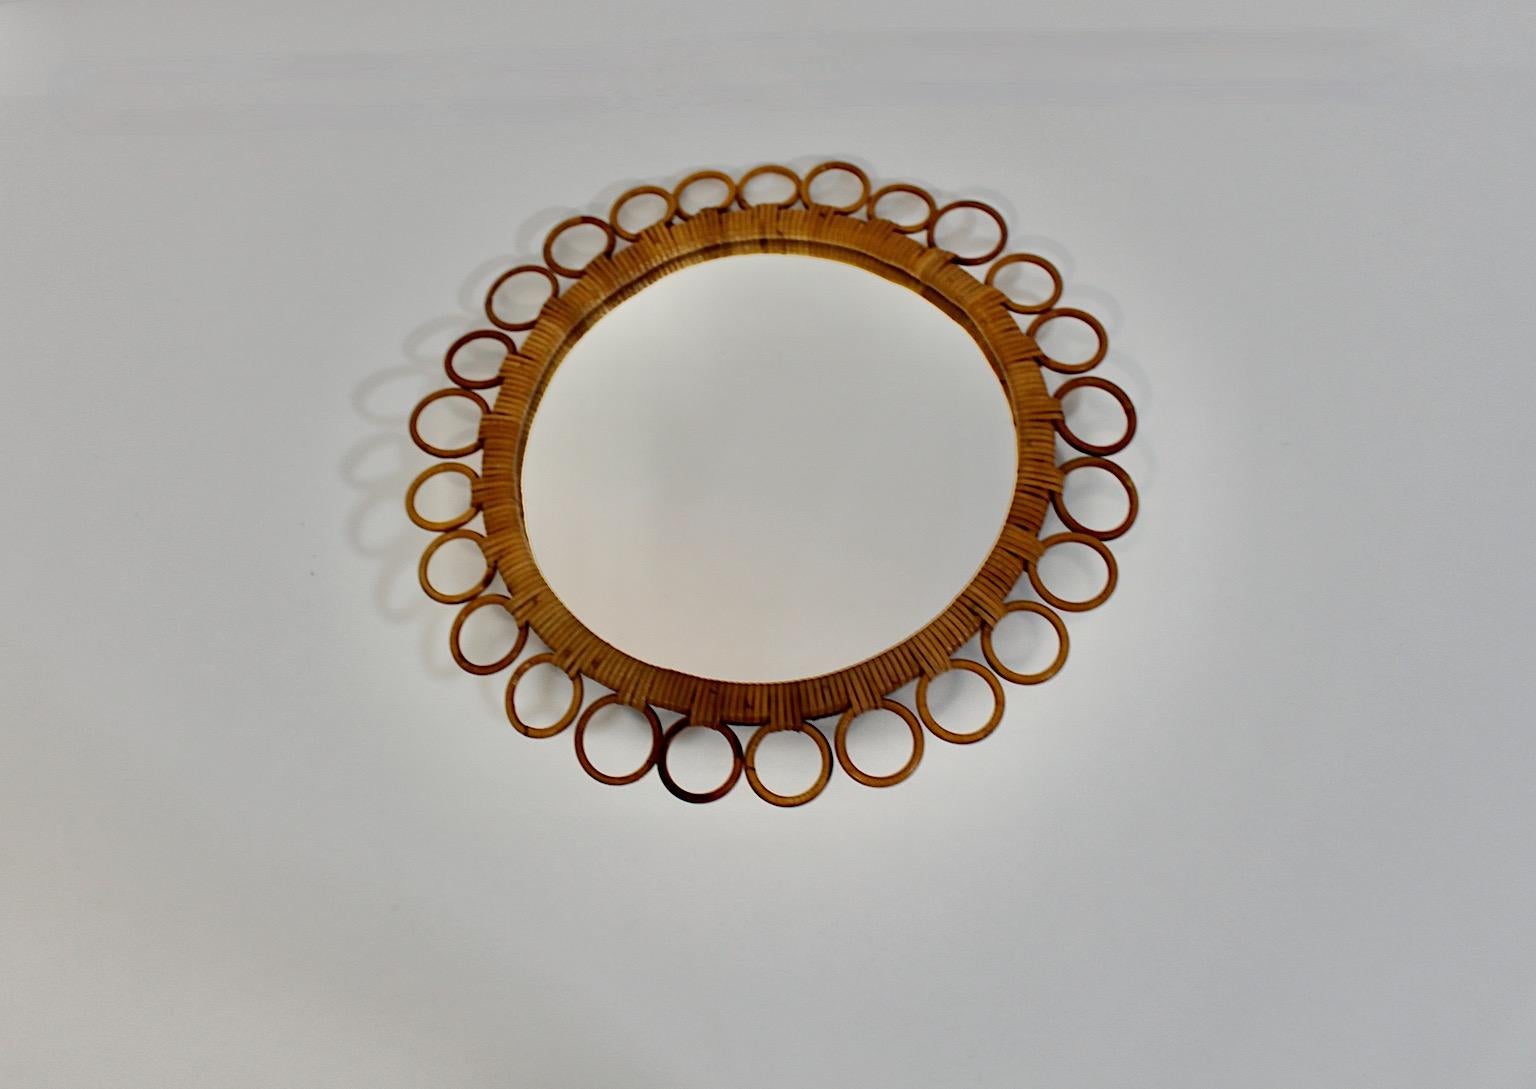 Organic Modern vintage circular wall mirror from rattan and mirror 1950s Italy.
A charming vintage wall mirror in circular shape from rattan with loop decor showing a wonderful size.
This stunning  wall mirror features a rattan wrapped frame with